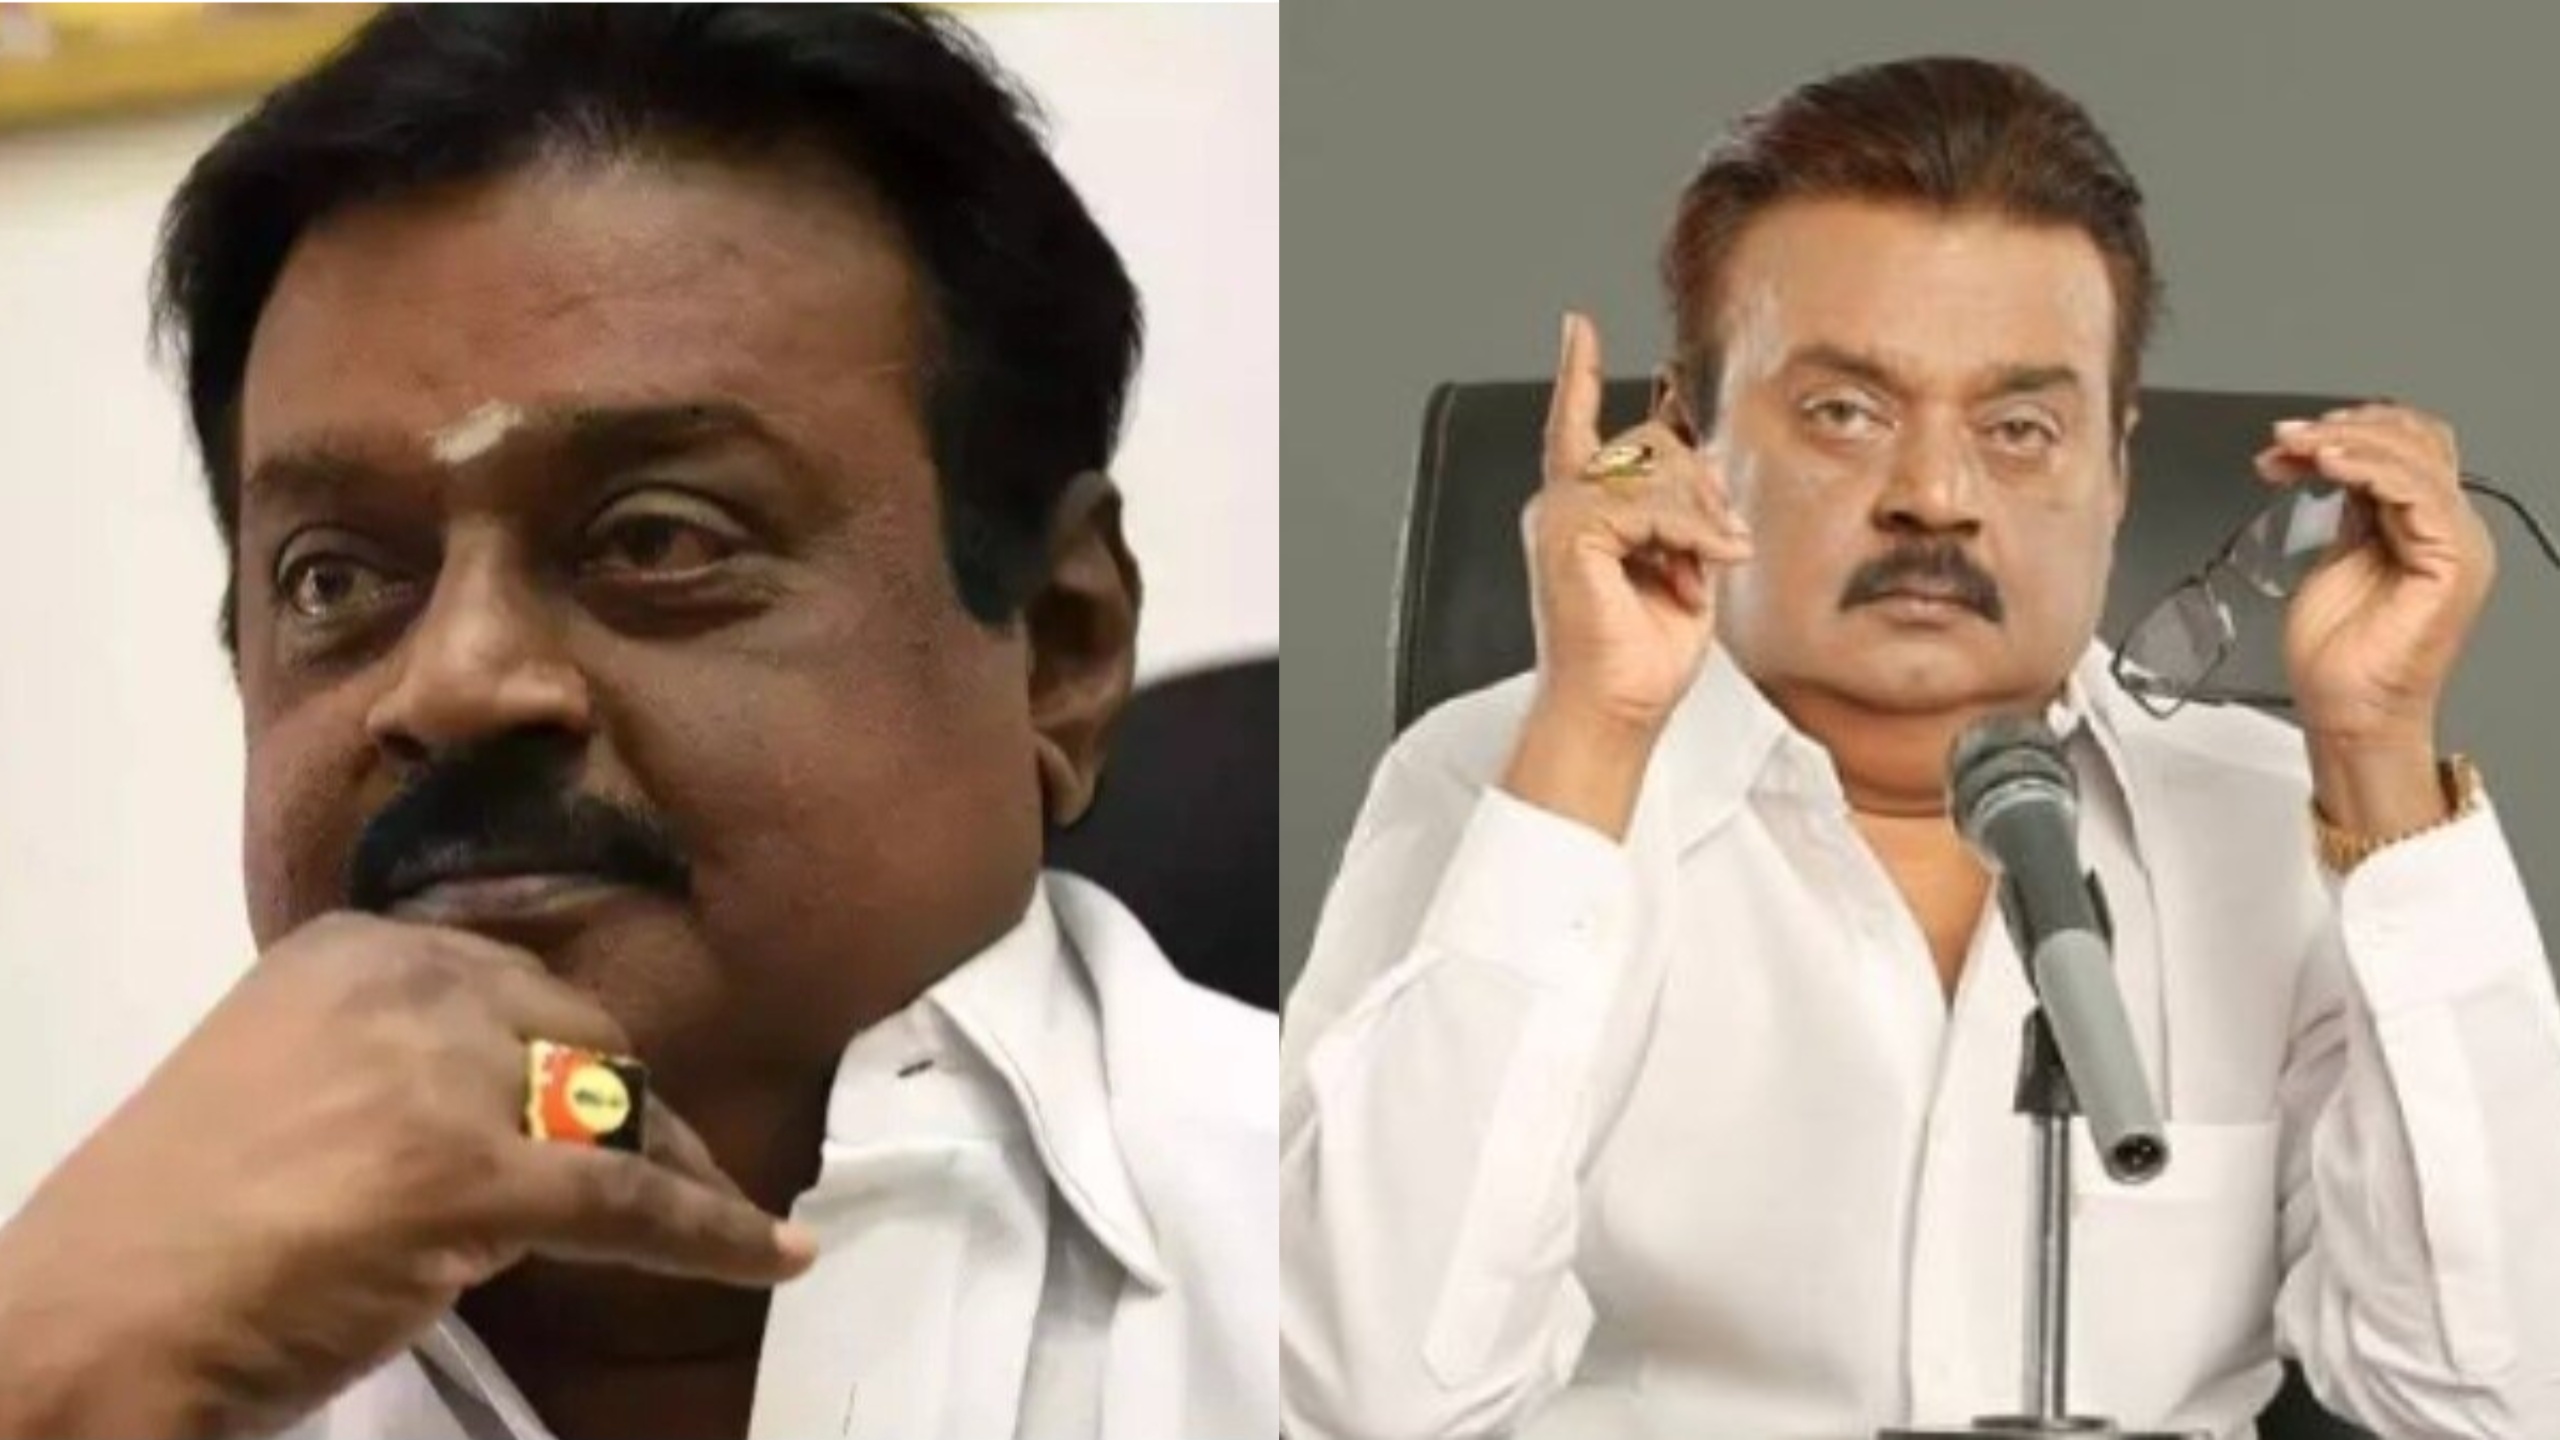 Vijayakanth dies after being diagnosed with Pneumonia. He was on ventilator after testing Covid positive.